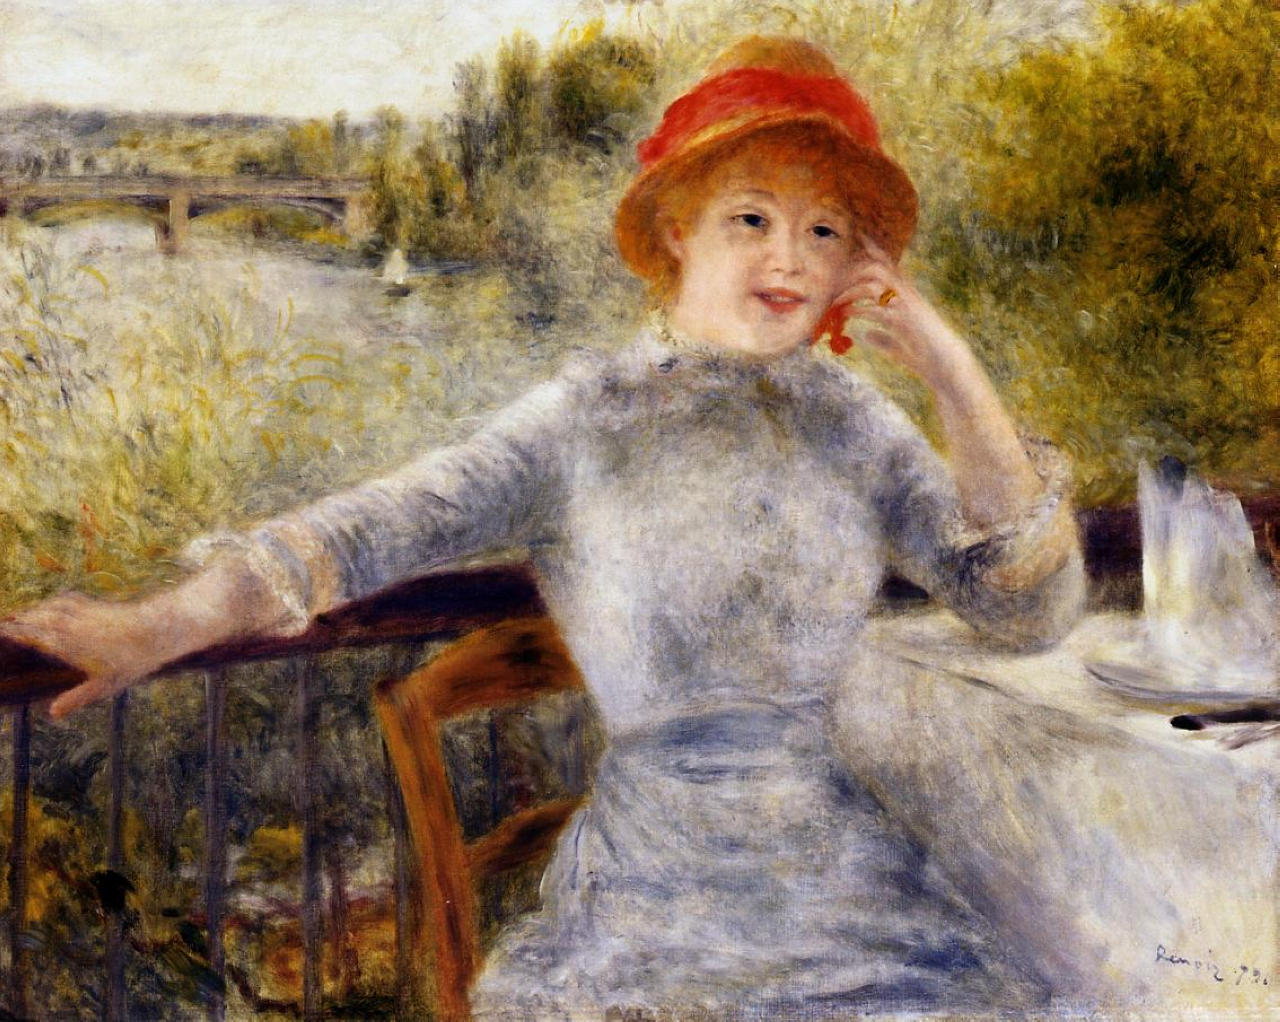 Alphonsine Fournaise on the Isle of Chatou - Pierre-Auguste Renoir painting on canvas